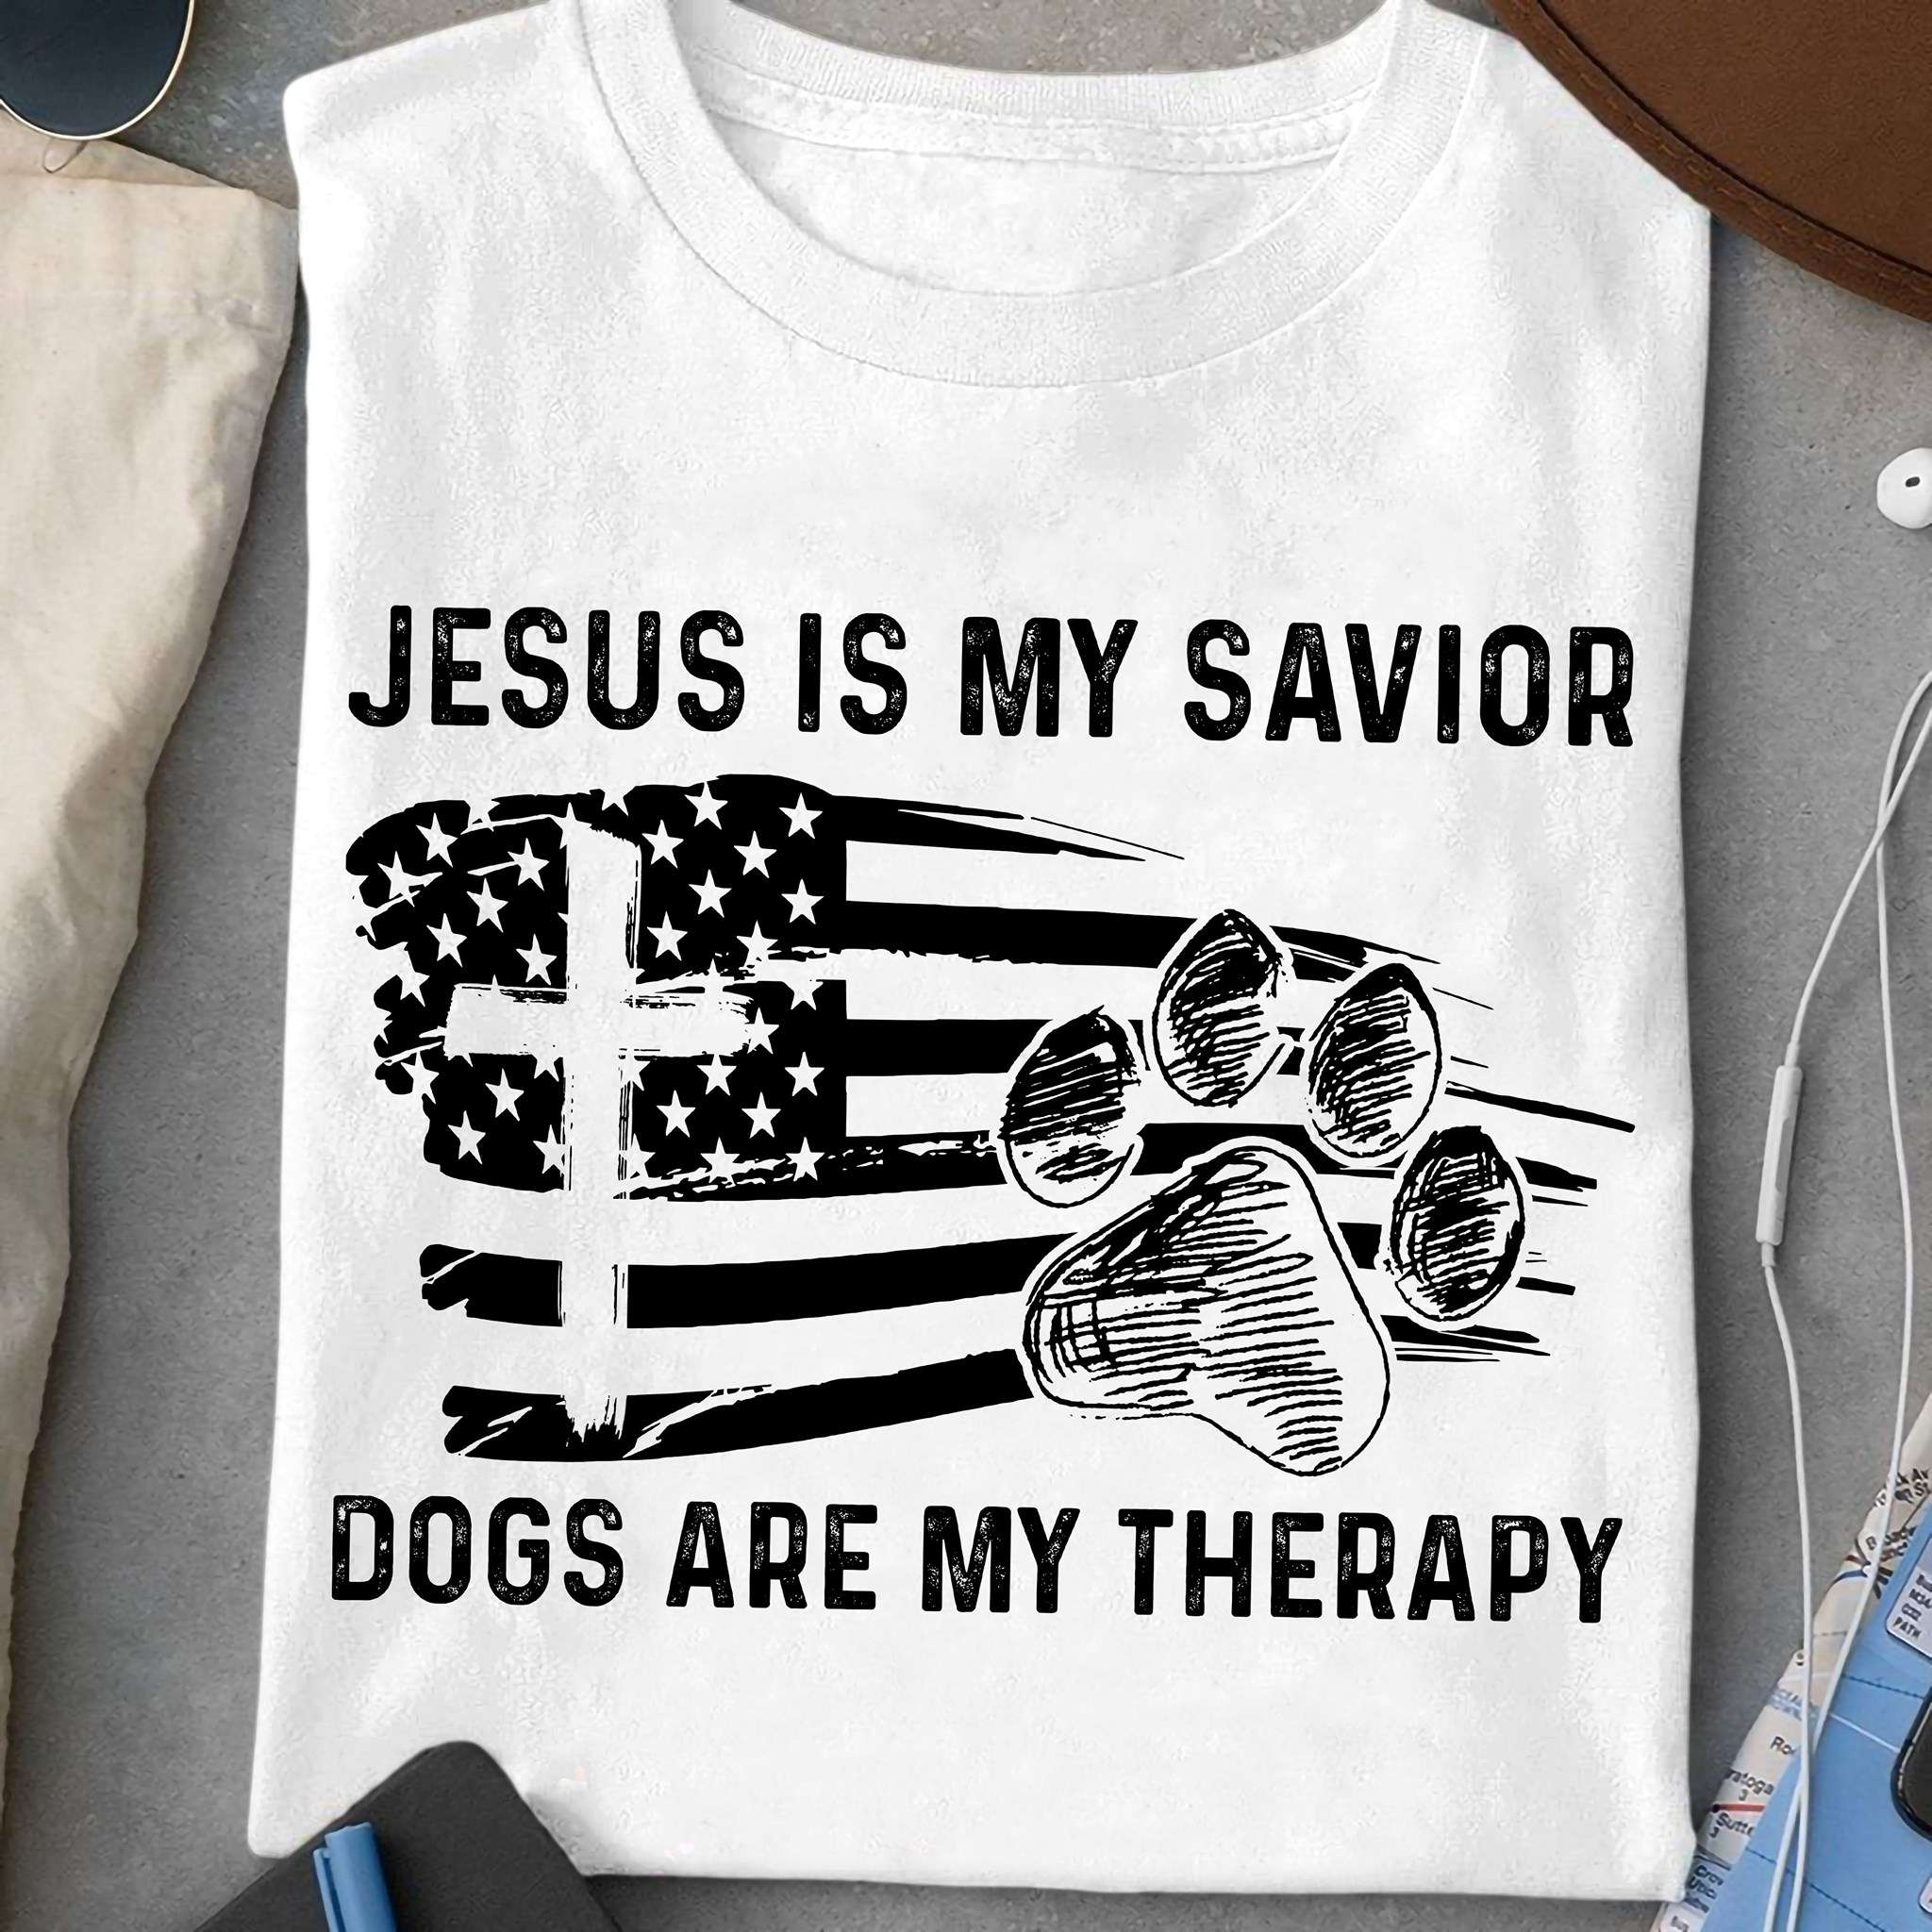 Jesus is my savior, dogs are my therapy - American dog lover, dog footprint